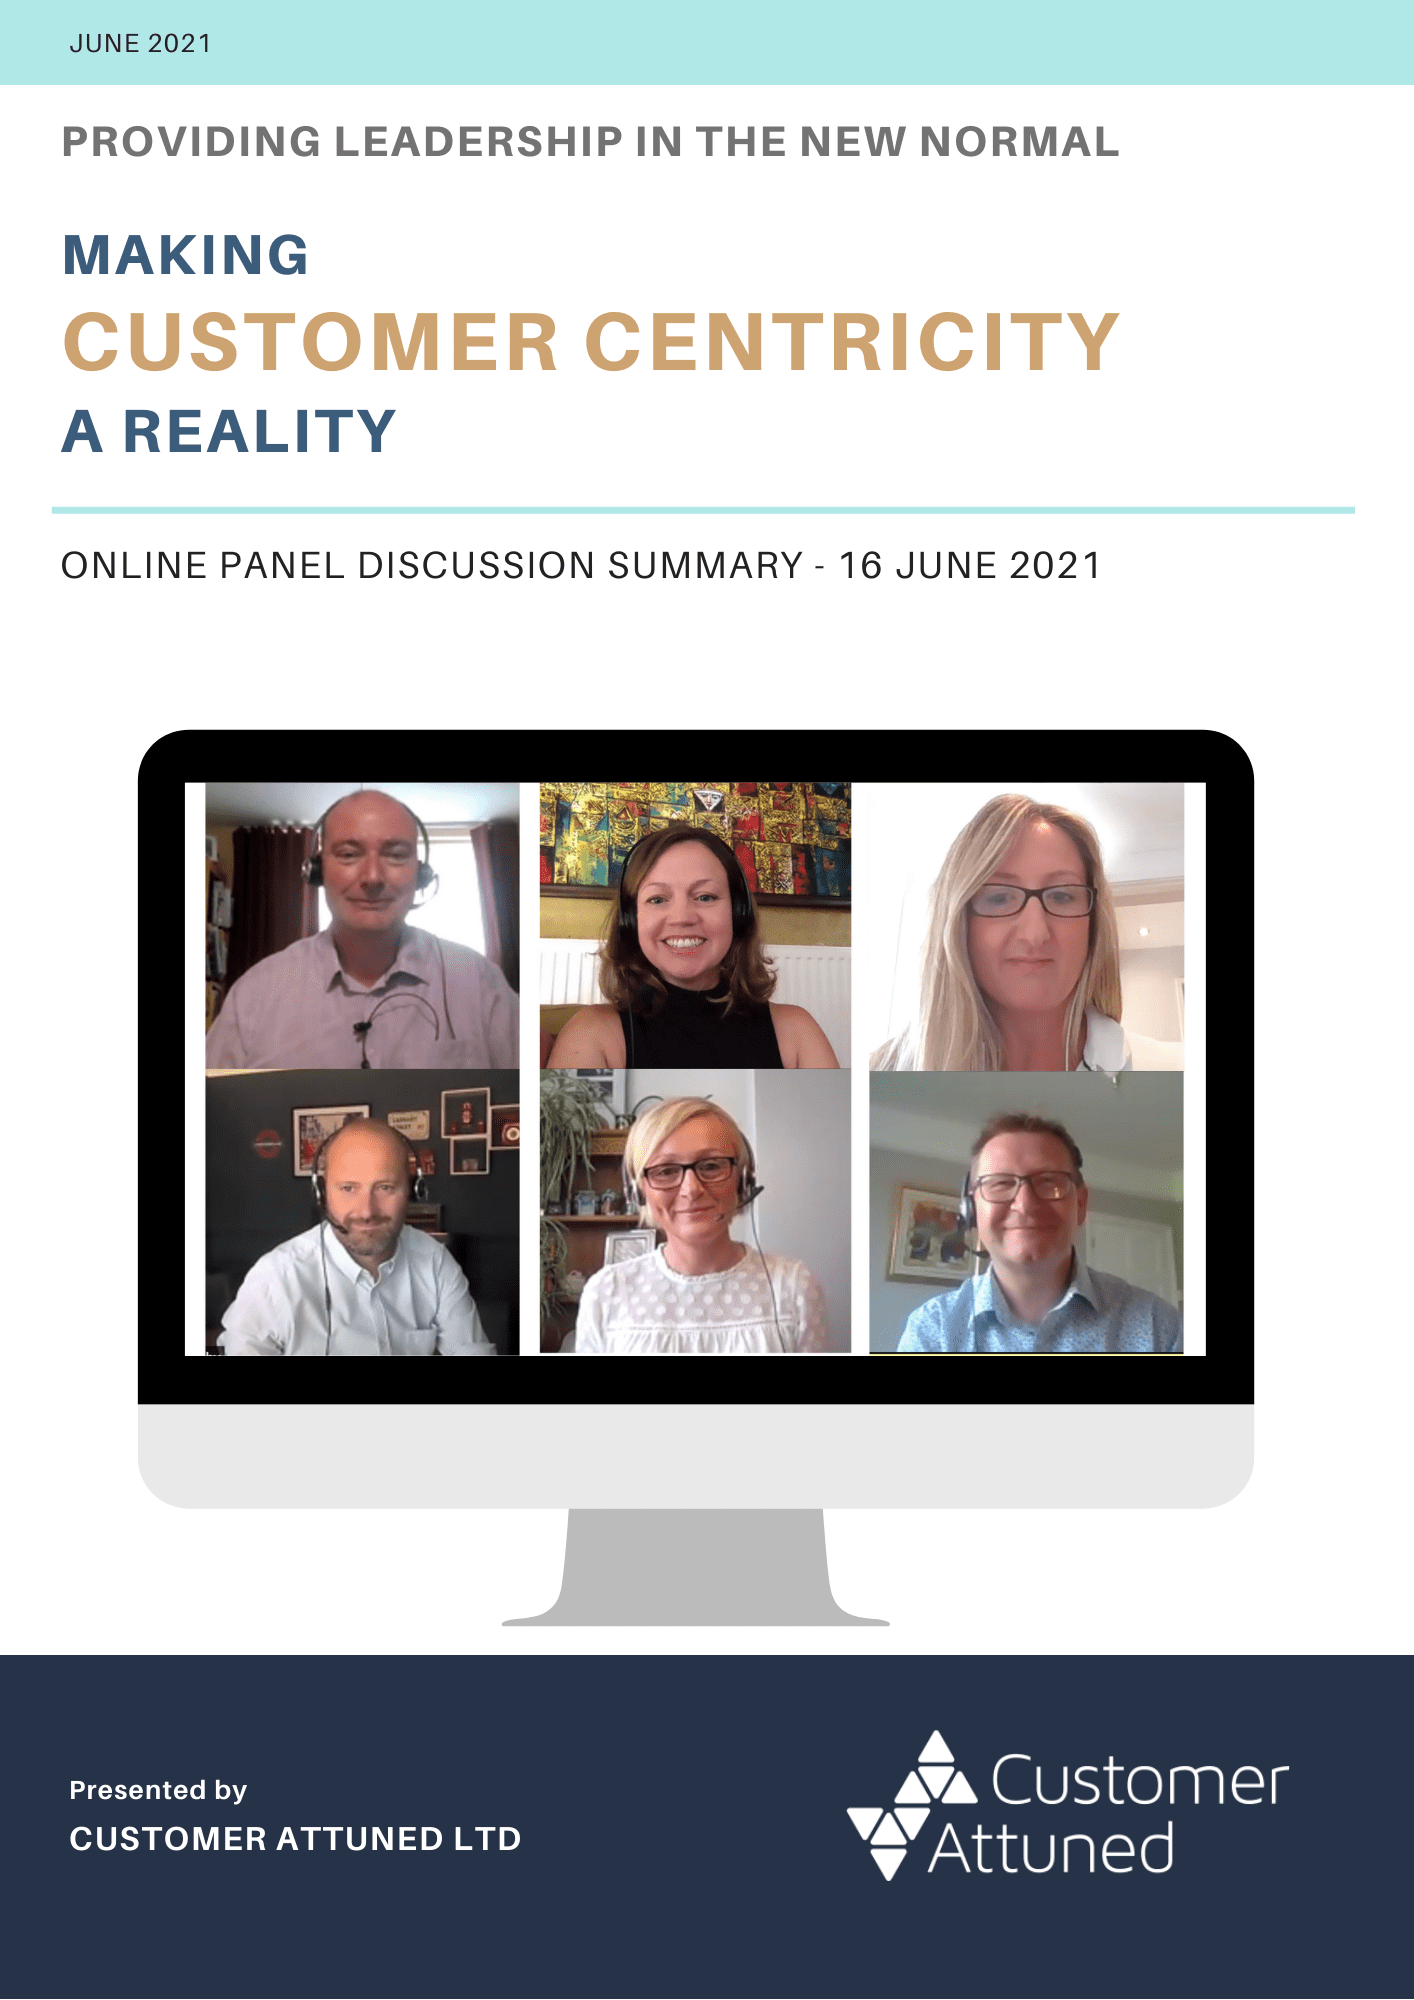 Making Customer Centricity a Reality - Panel Summary